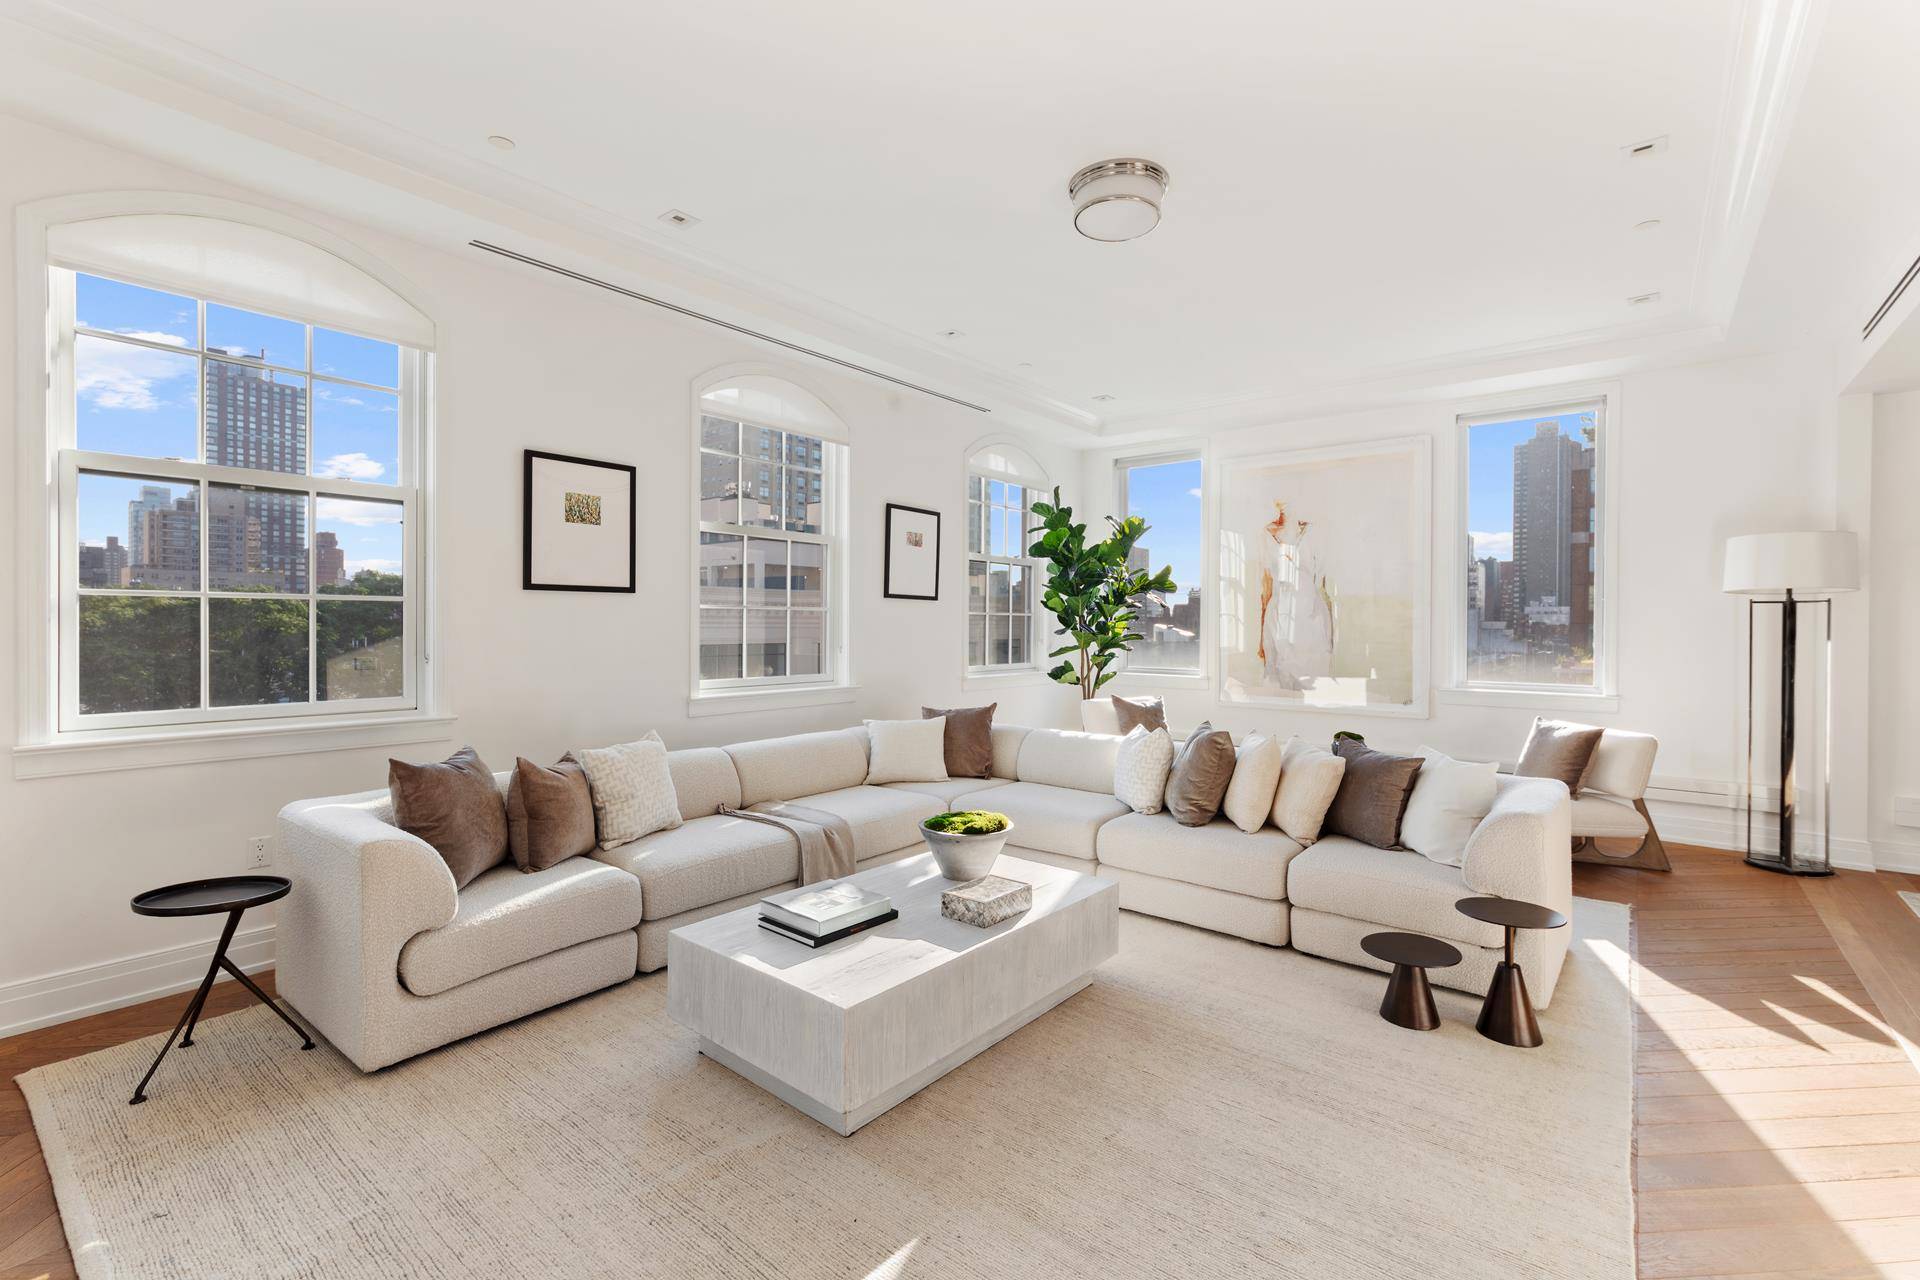 Welcome to this stunning triplex apartment located in a small boutique condo building in the Upper East Side, on a tranquil tree lined street.